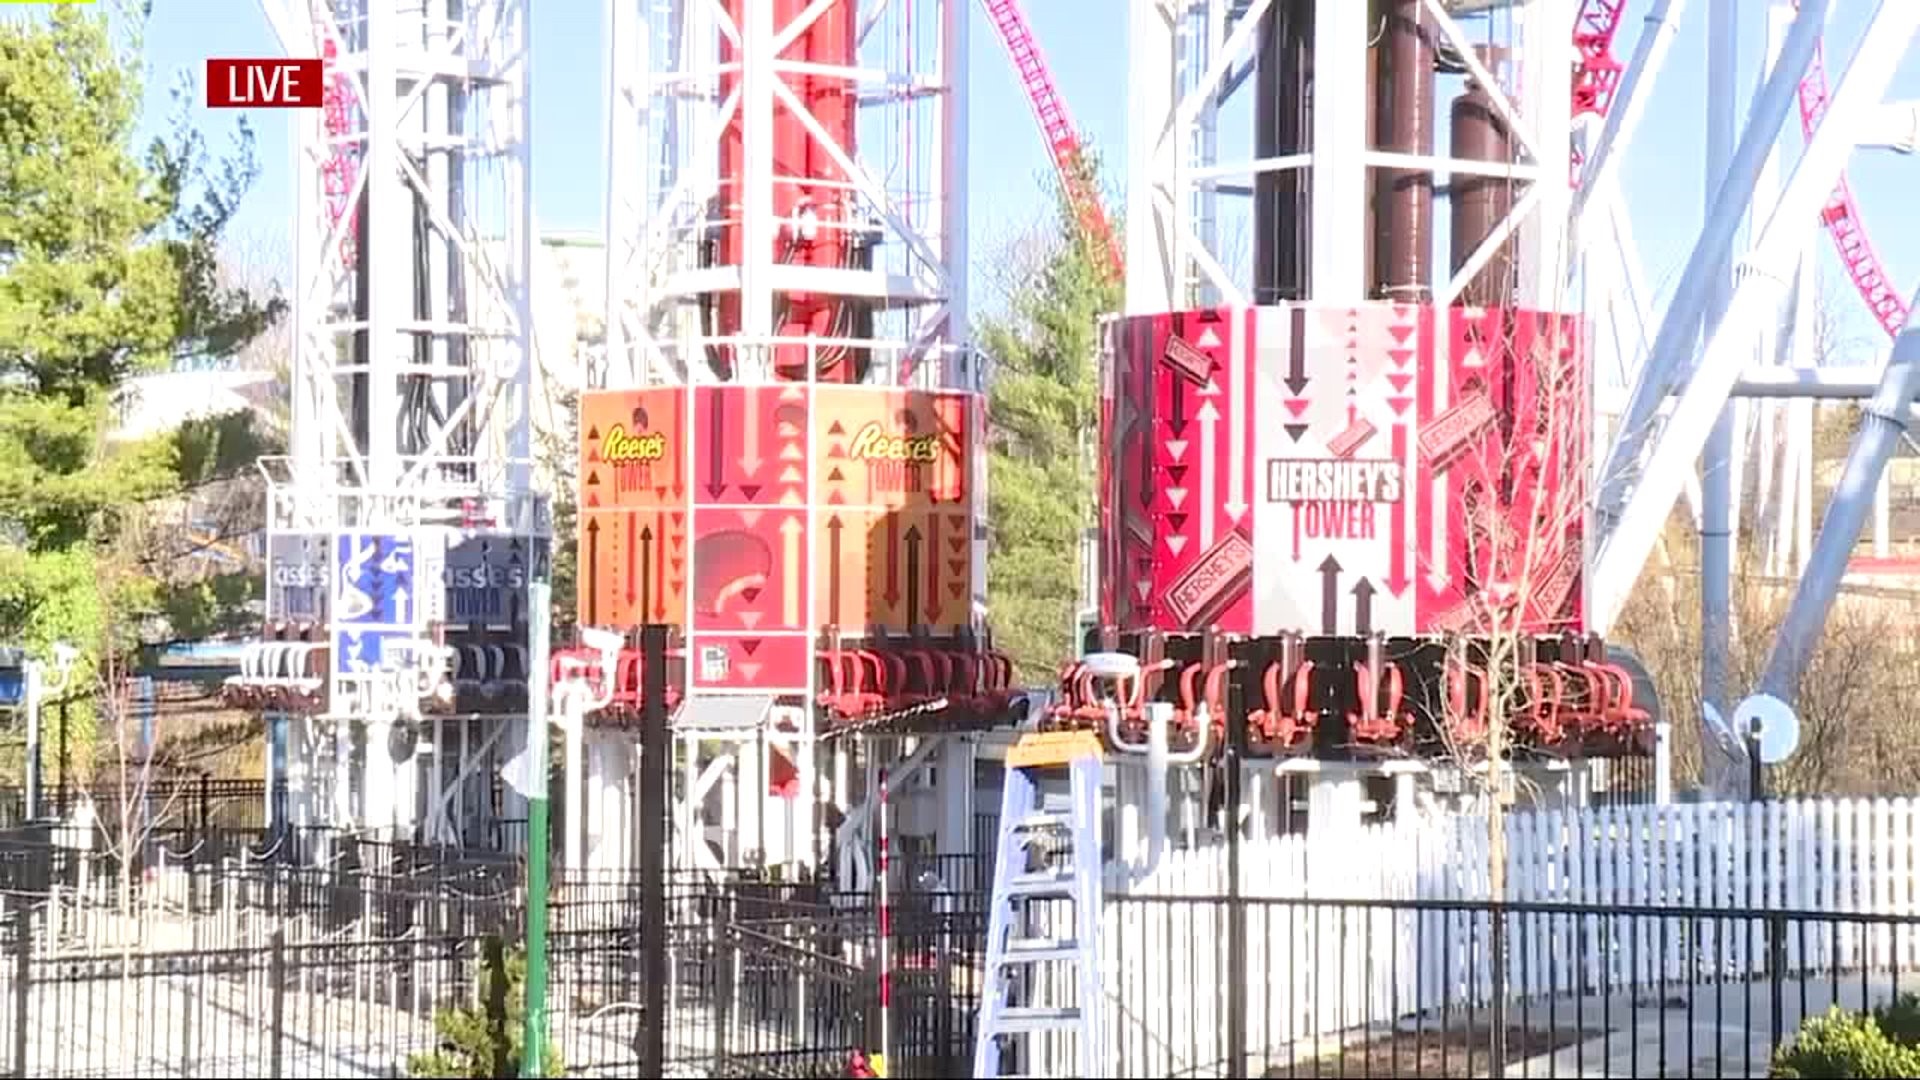 Getting ready for the big spring debut at Hersheypark in Dauphin County